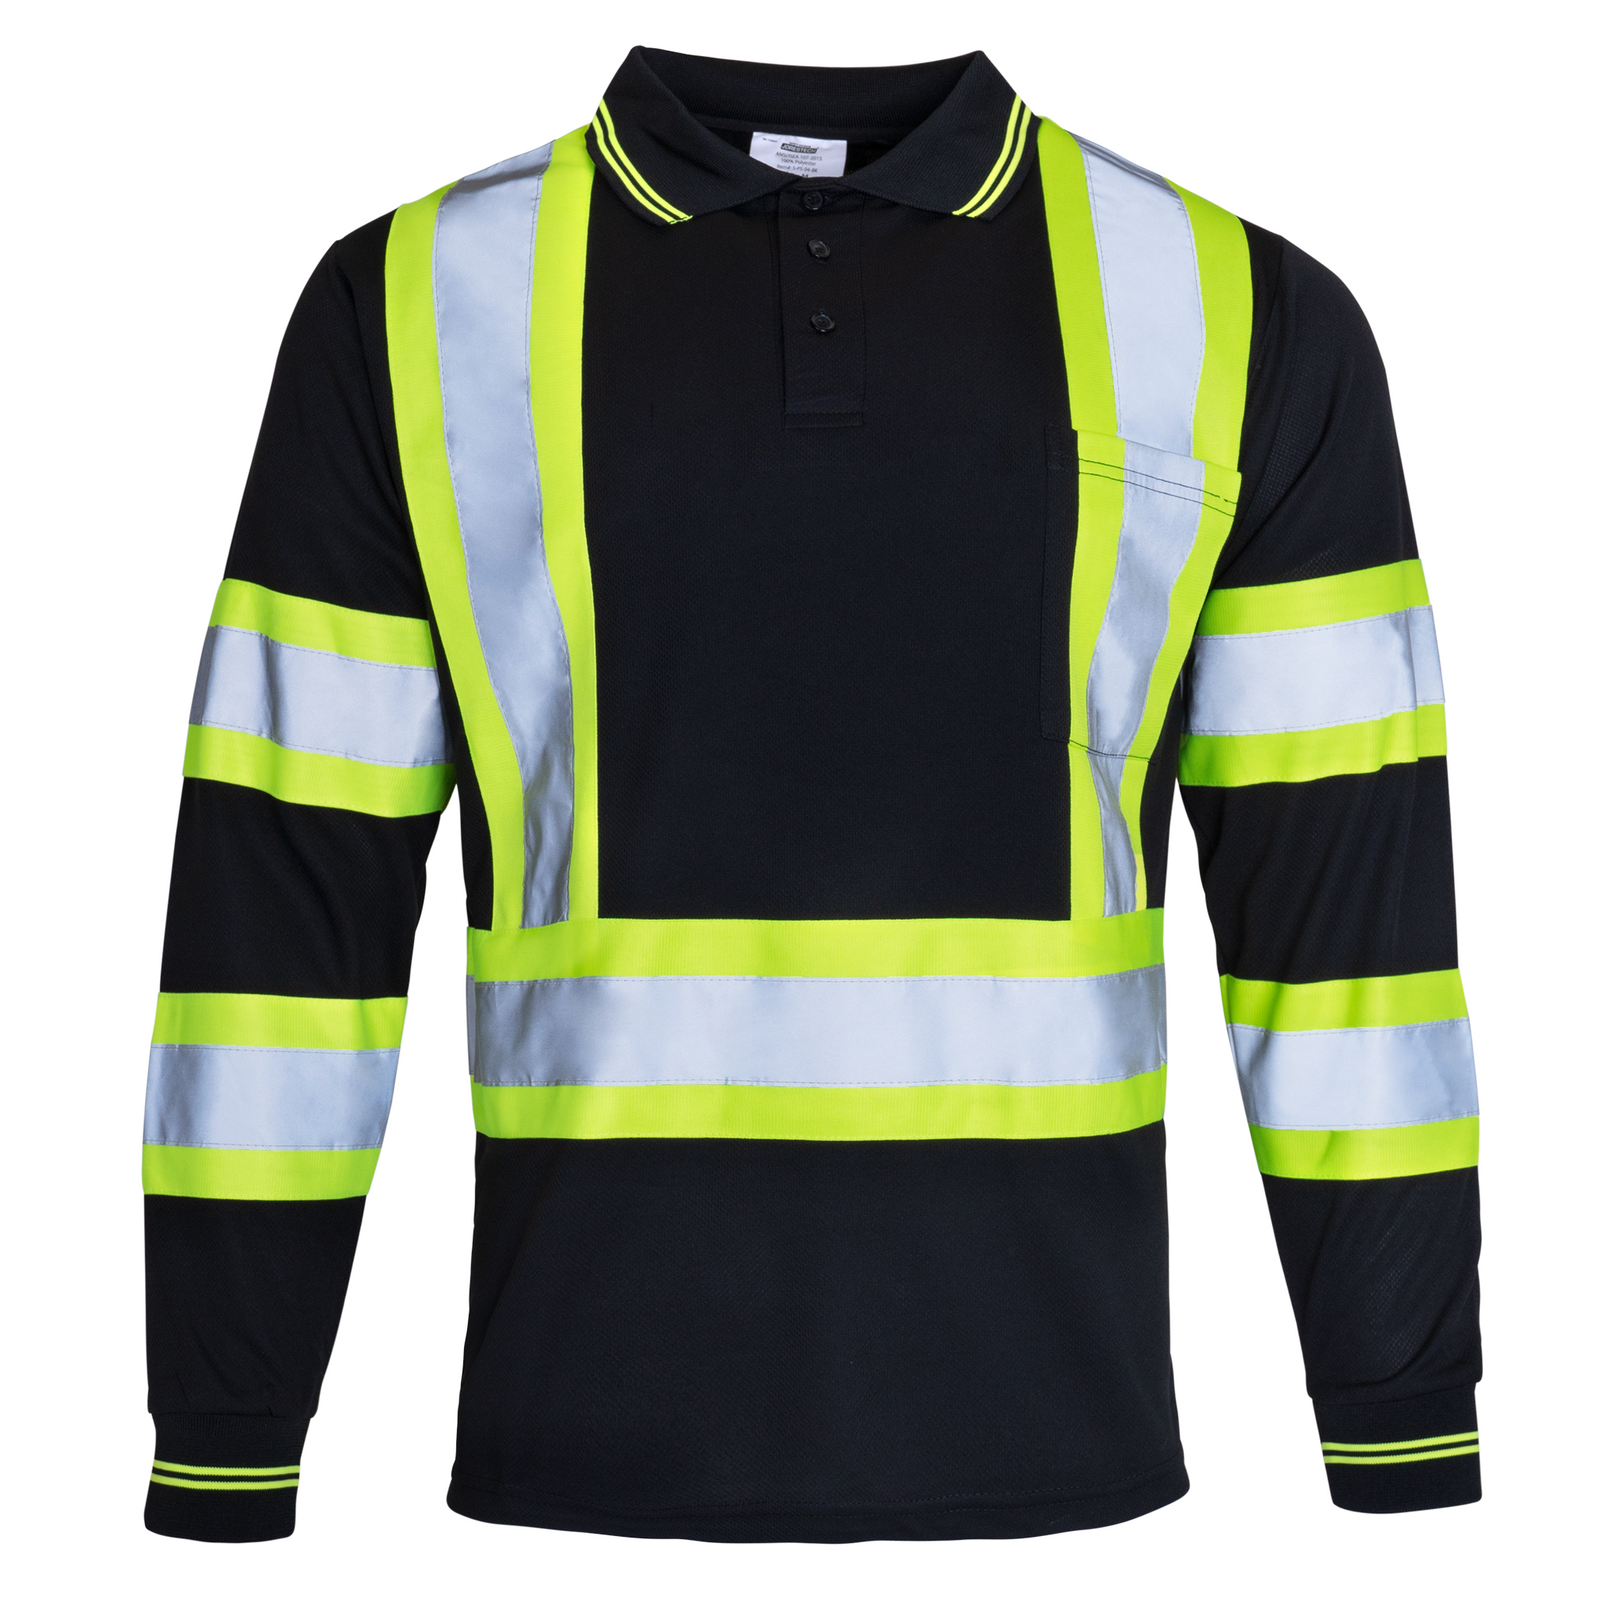 Black Breathable JORESTECH long sleeve safety shirt with chest pocket